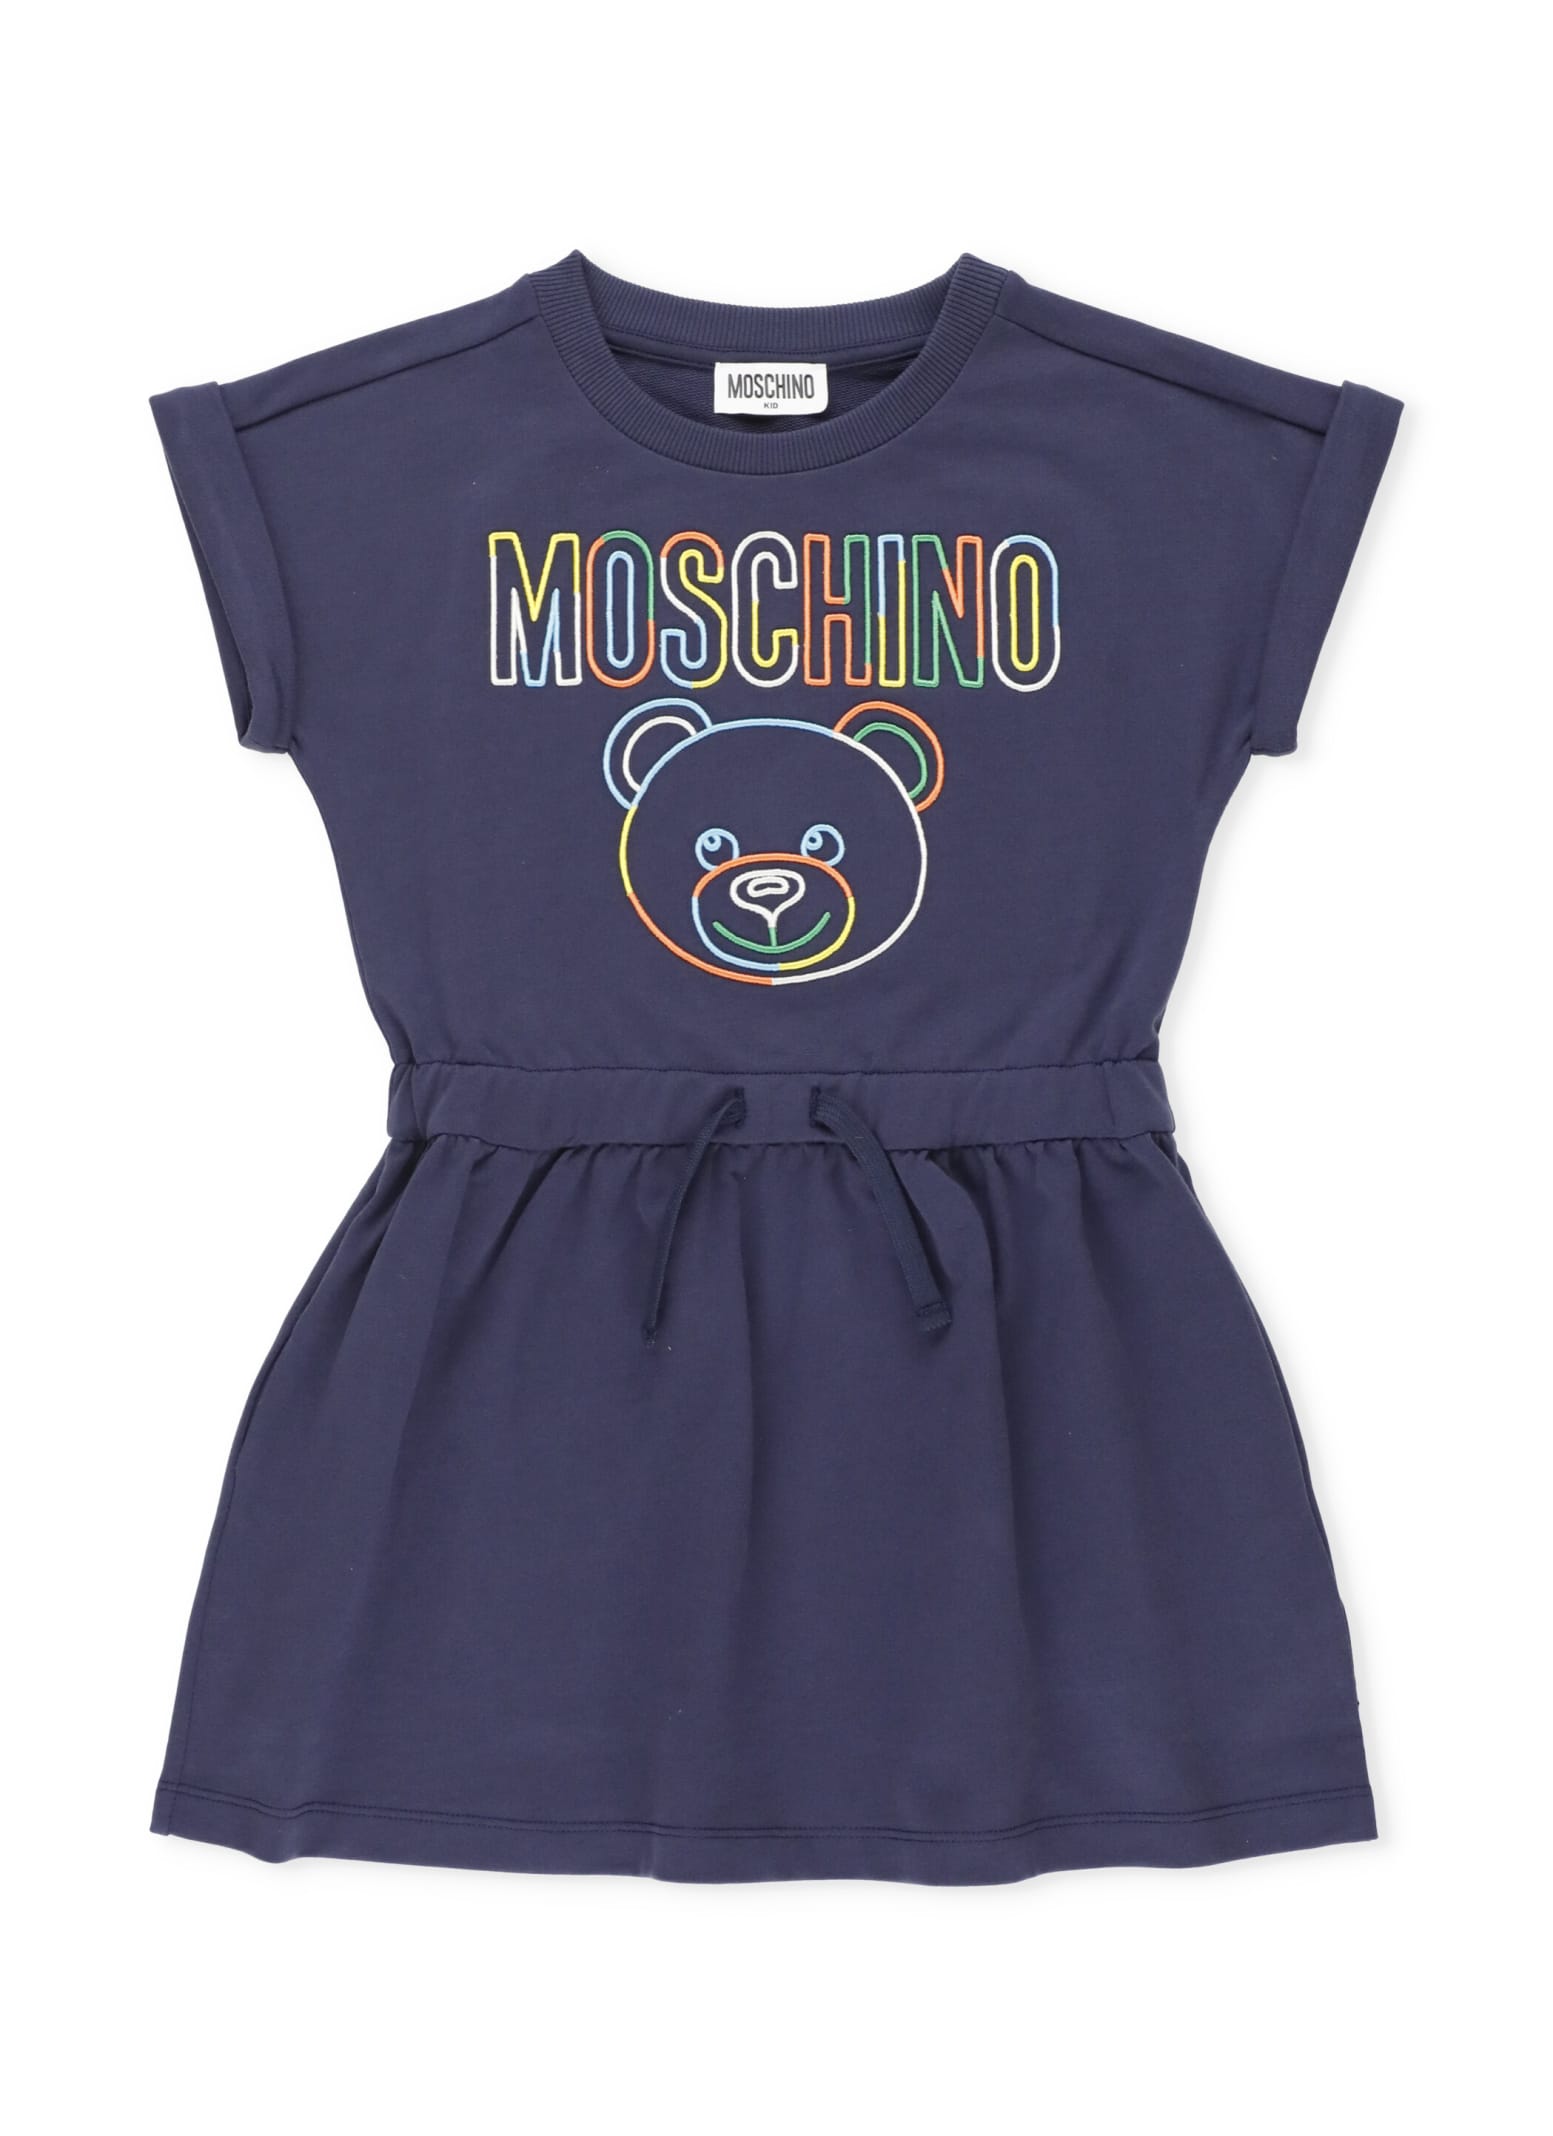 Moschino embroidered teddy dress